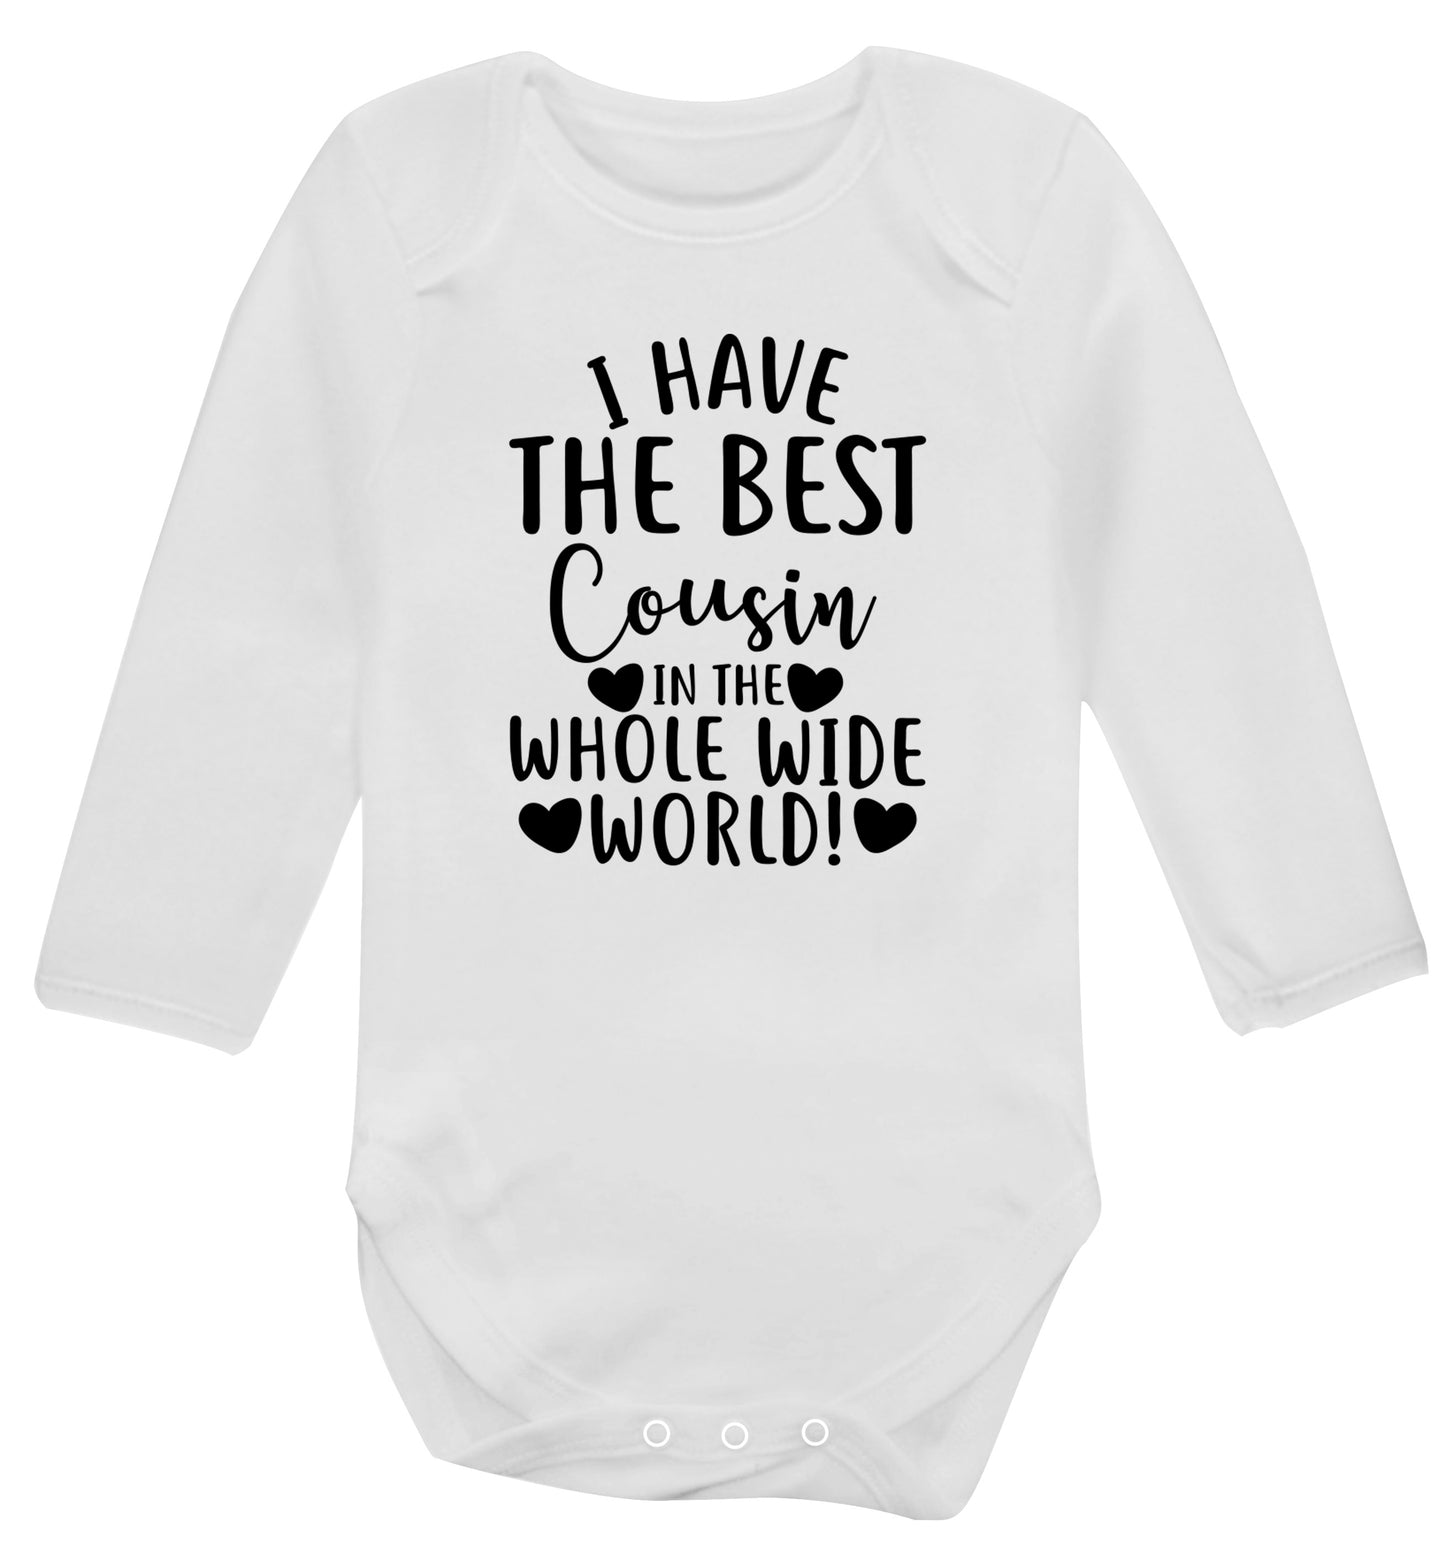 I have the best cousin in the whole wide world! Baby Vest long sleeved white 6-12 months